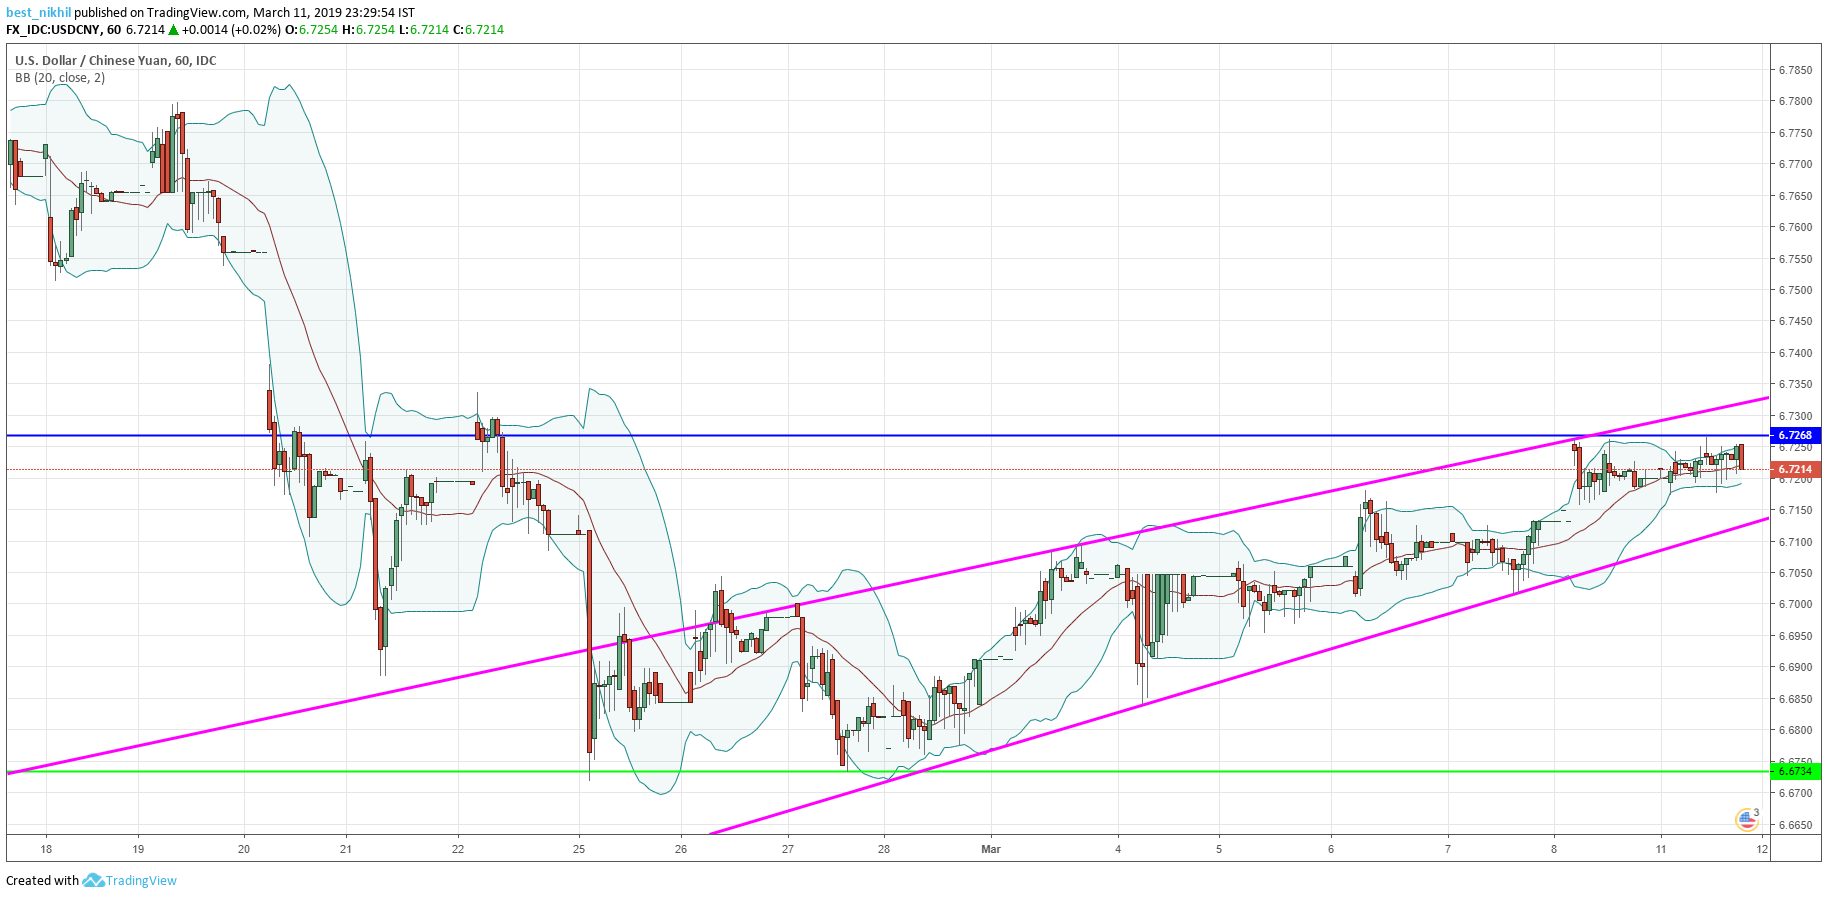 USDCNY Chart 11 March 2019